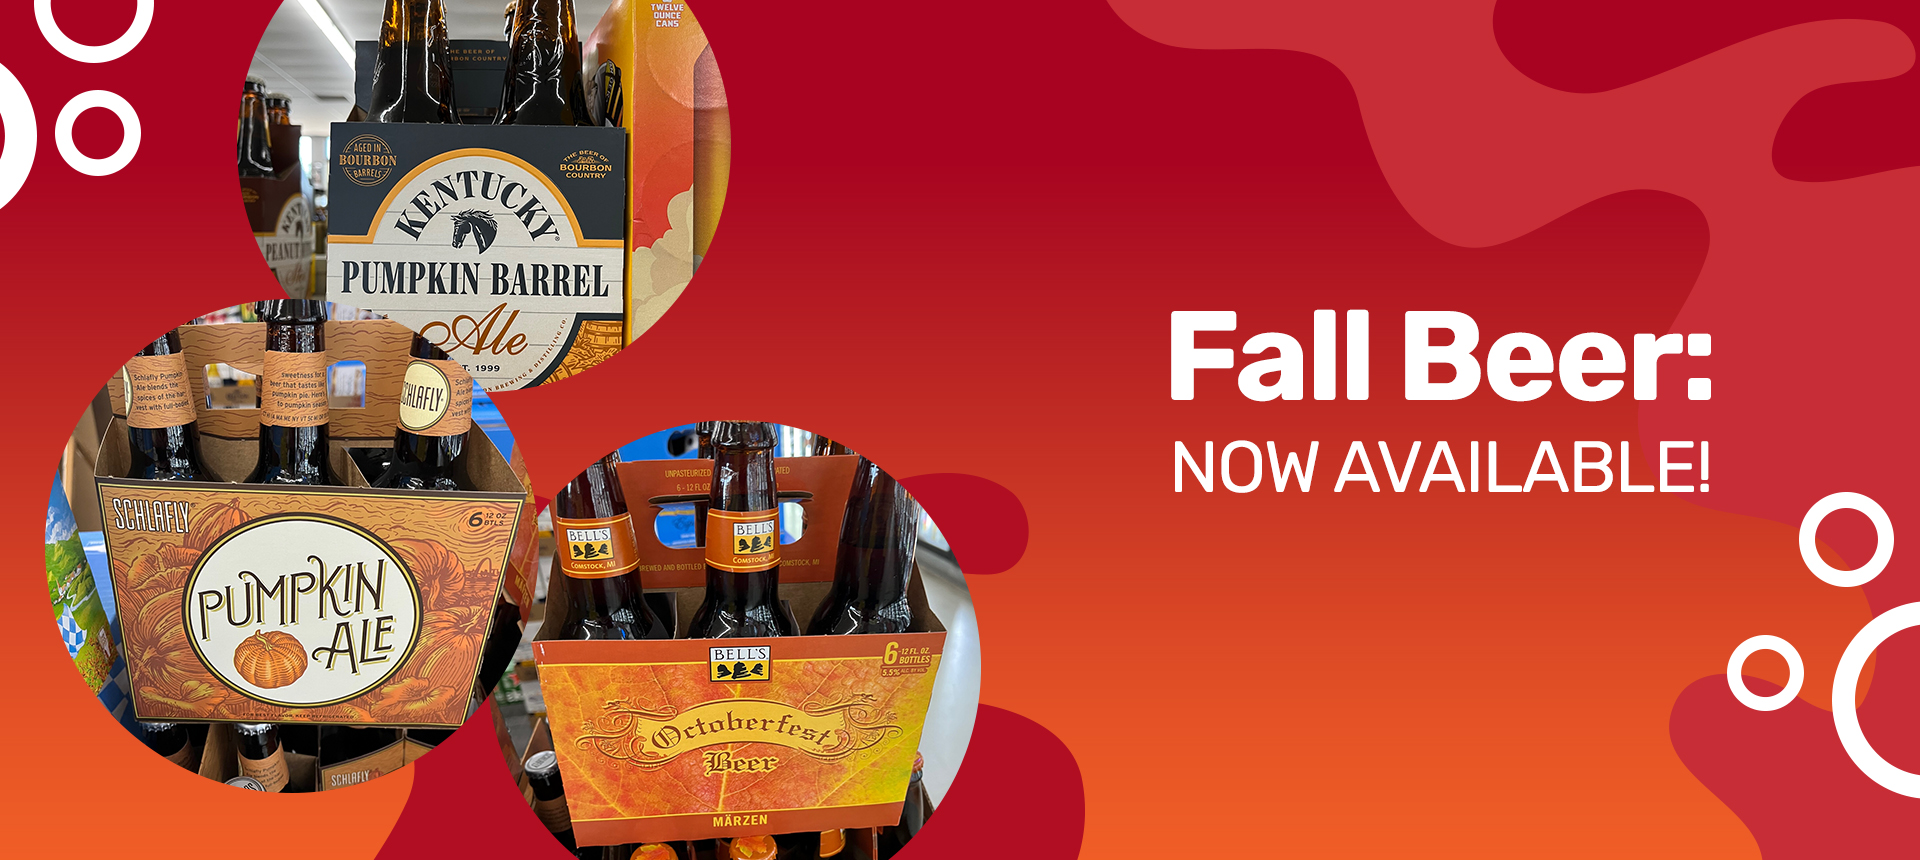 Fall Beer at Lundeen's Liquor is now available!